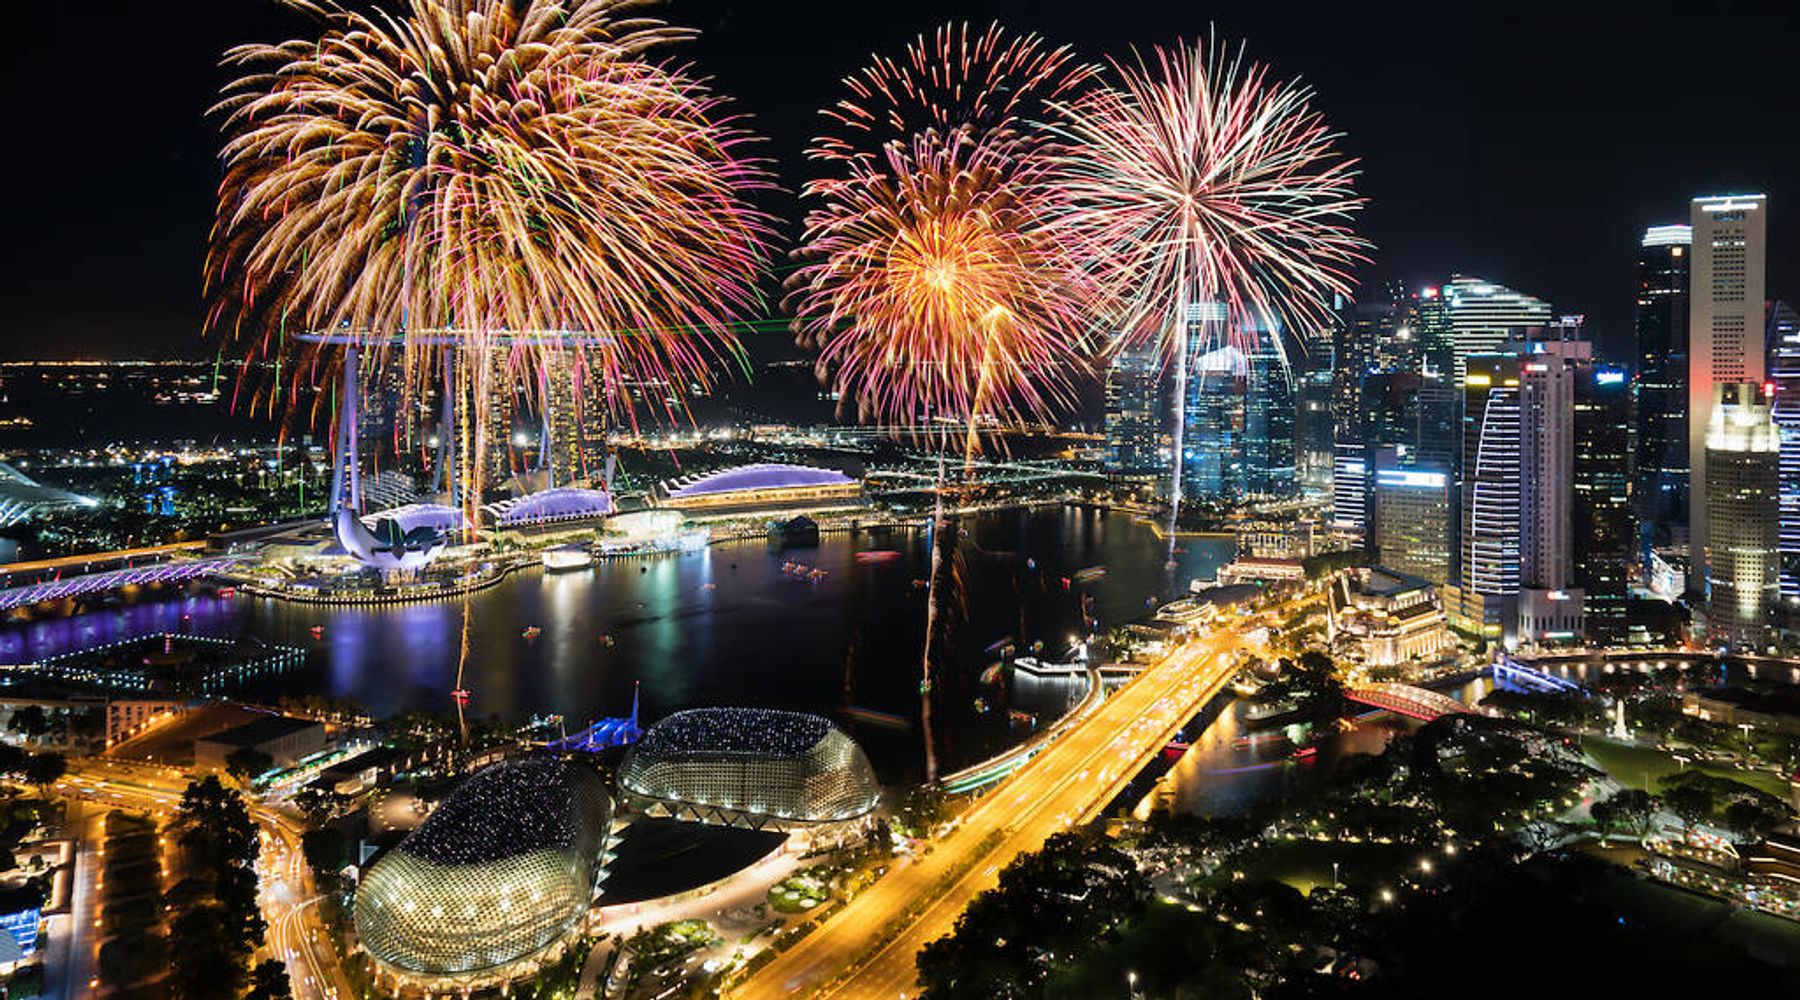 Dining With a View: 8 Spots for Great Dinners While Catching the New Year's Eve Fireworks